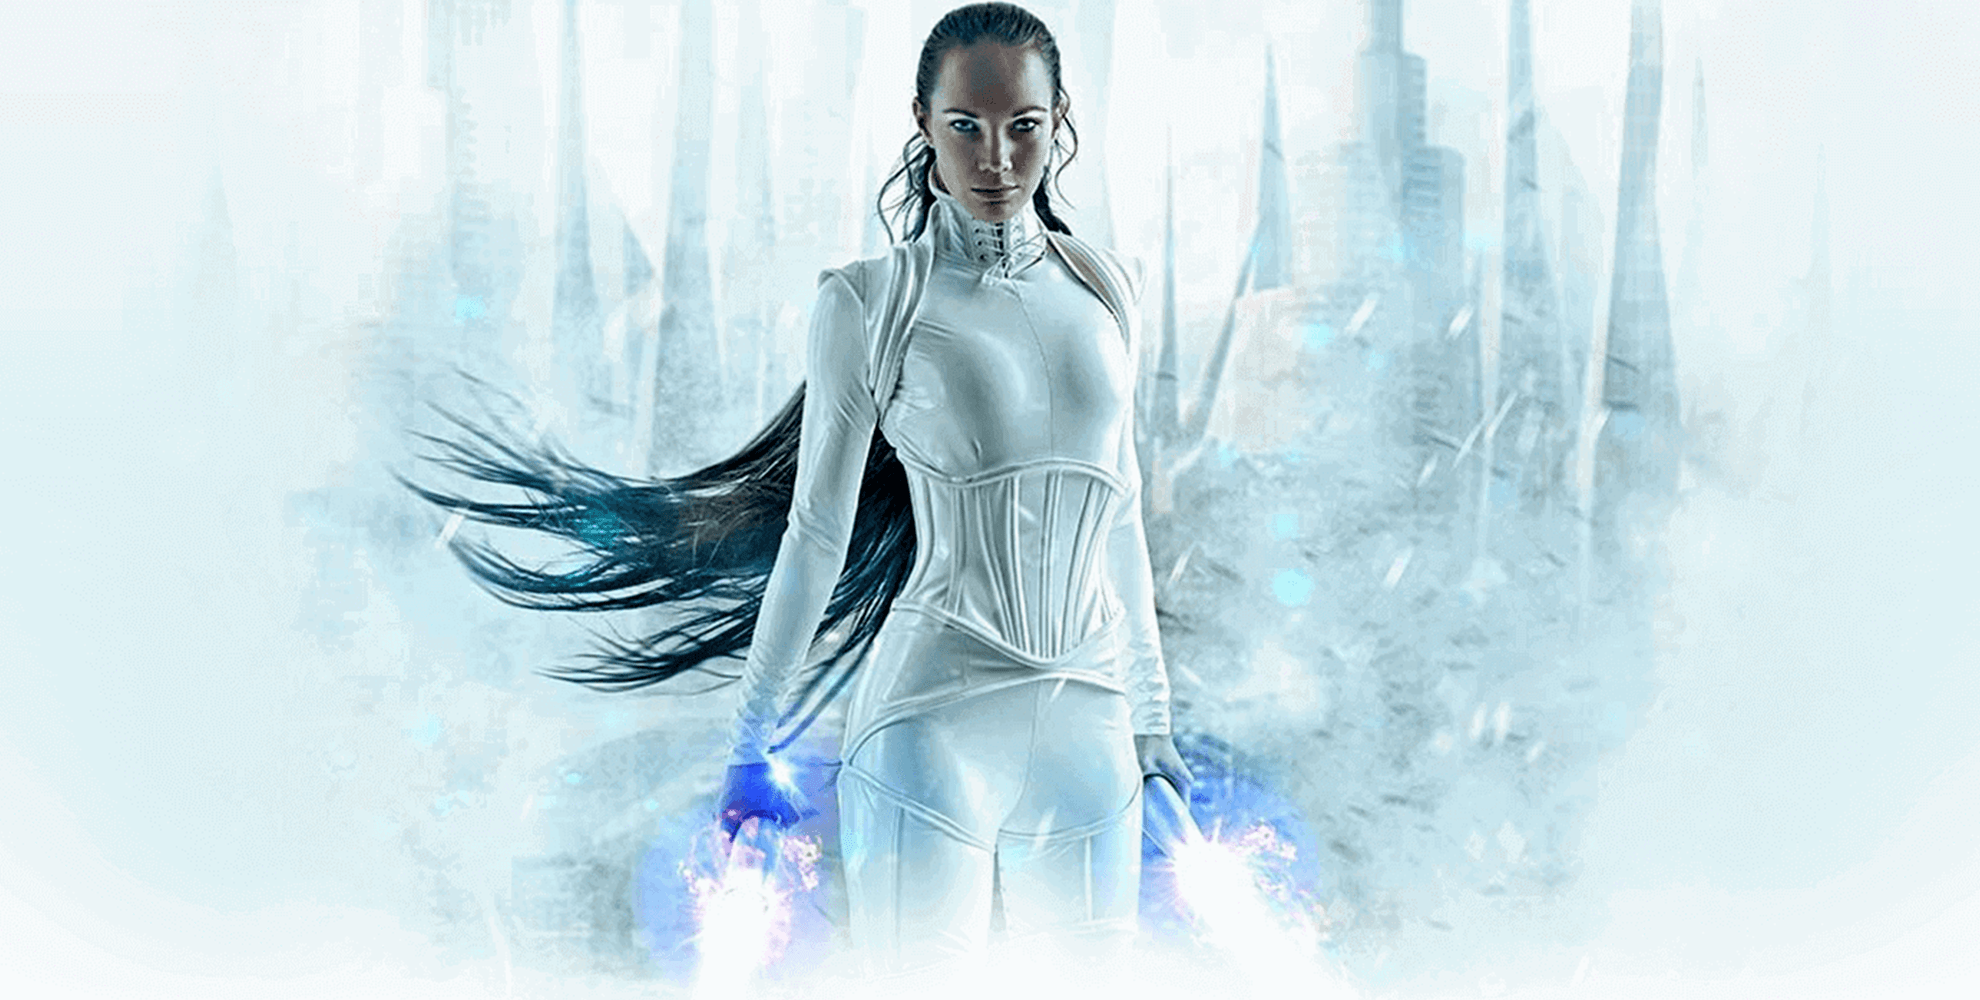 Gaming style image of woman in white with frosty background, holding two beam sabres